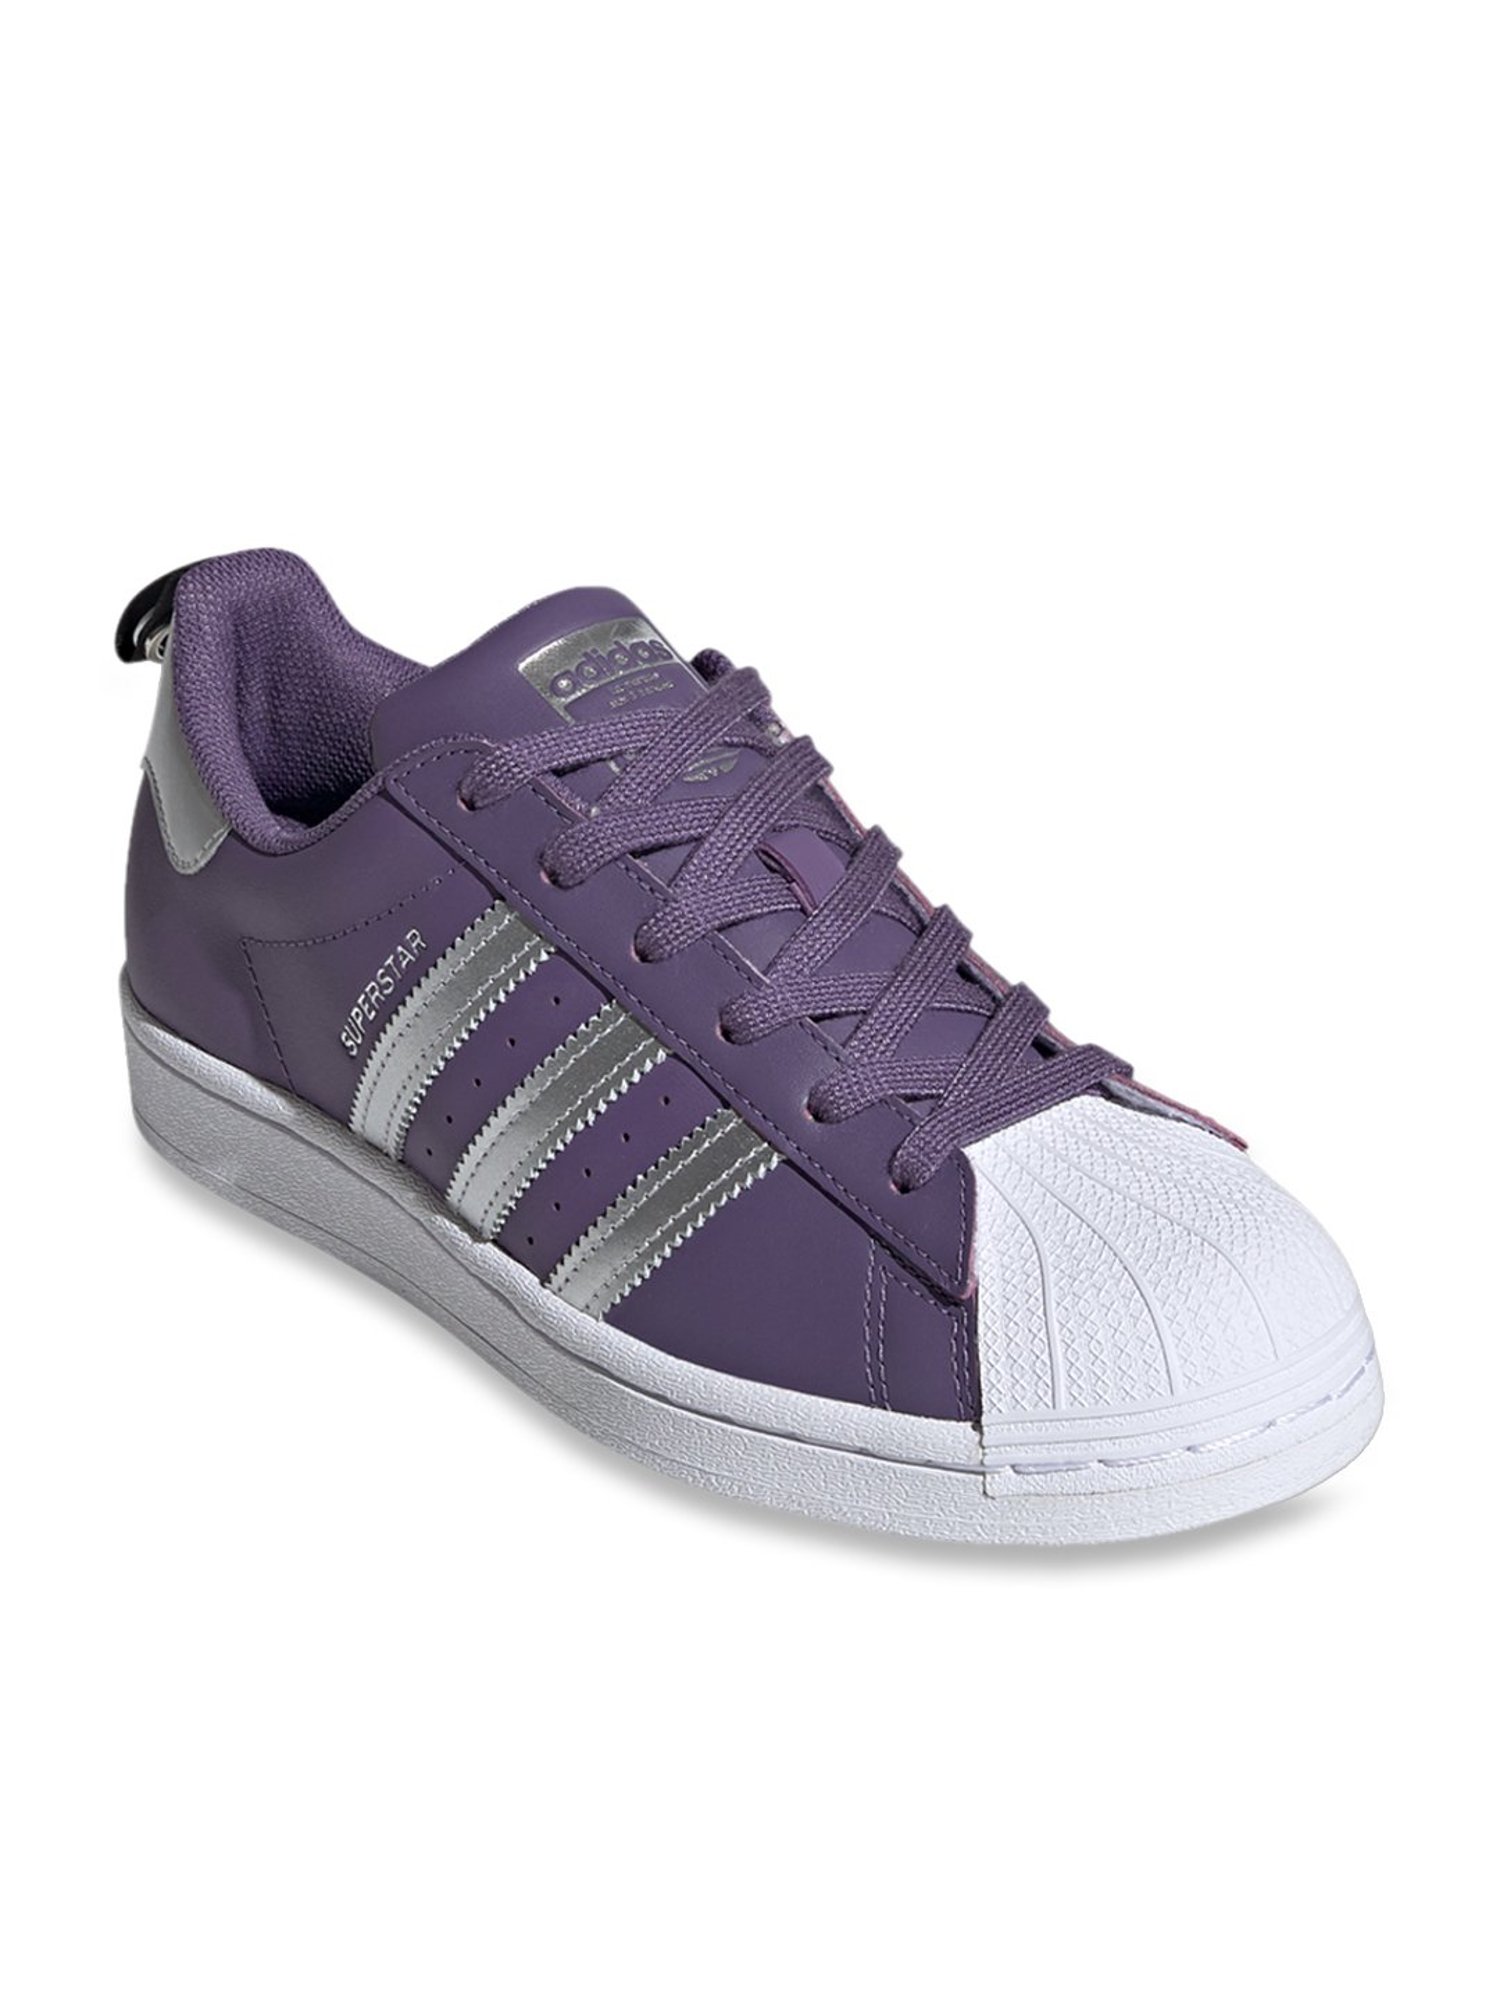 First copy Adidas Superstar white Sneaker online in India at Shoesinkart.